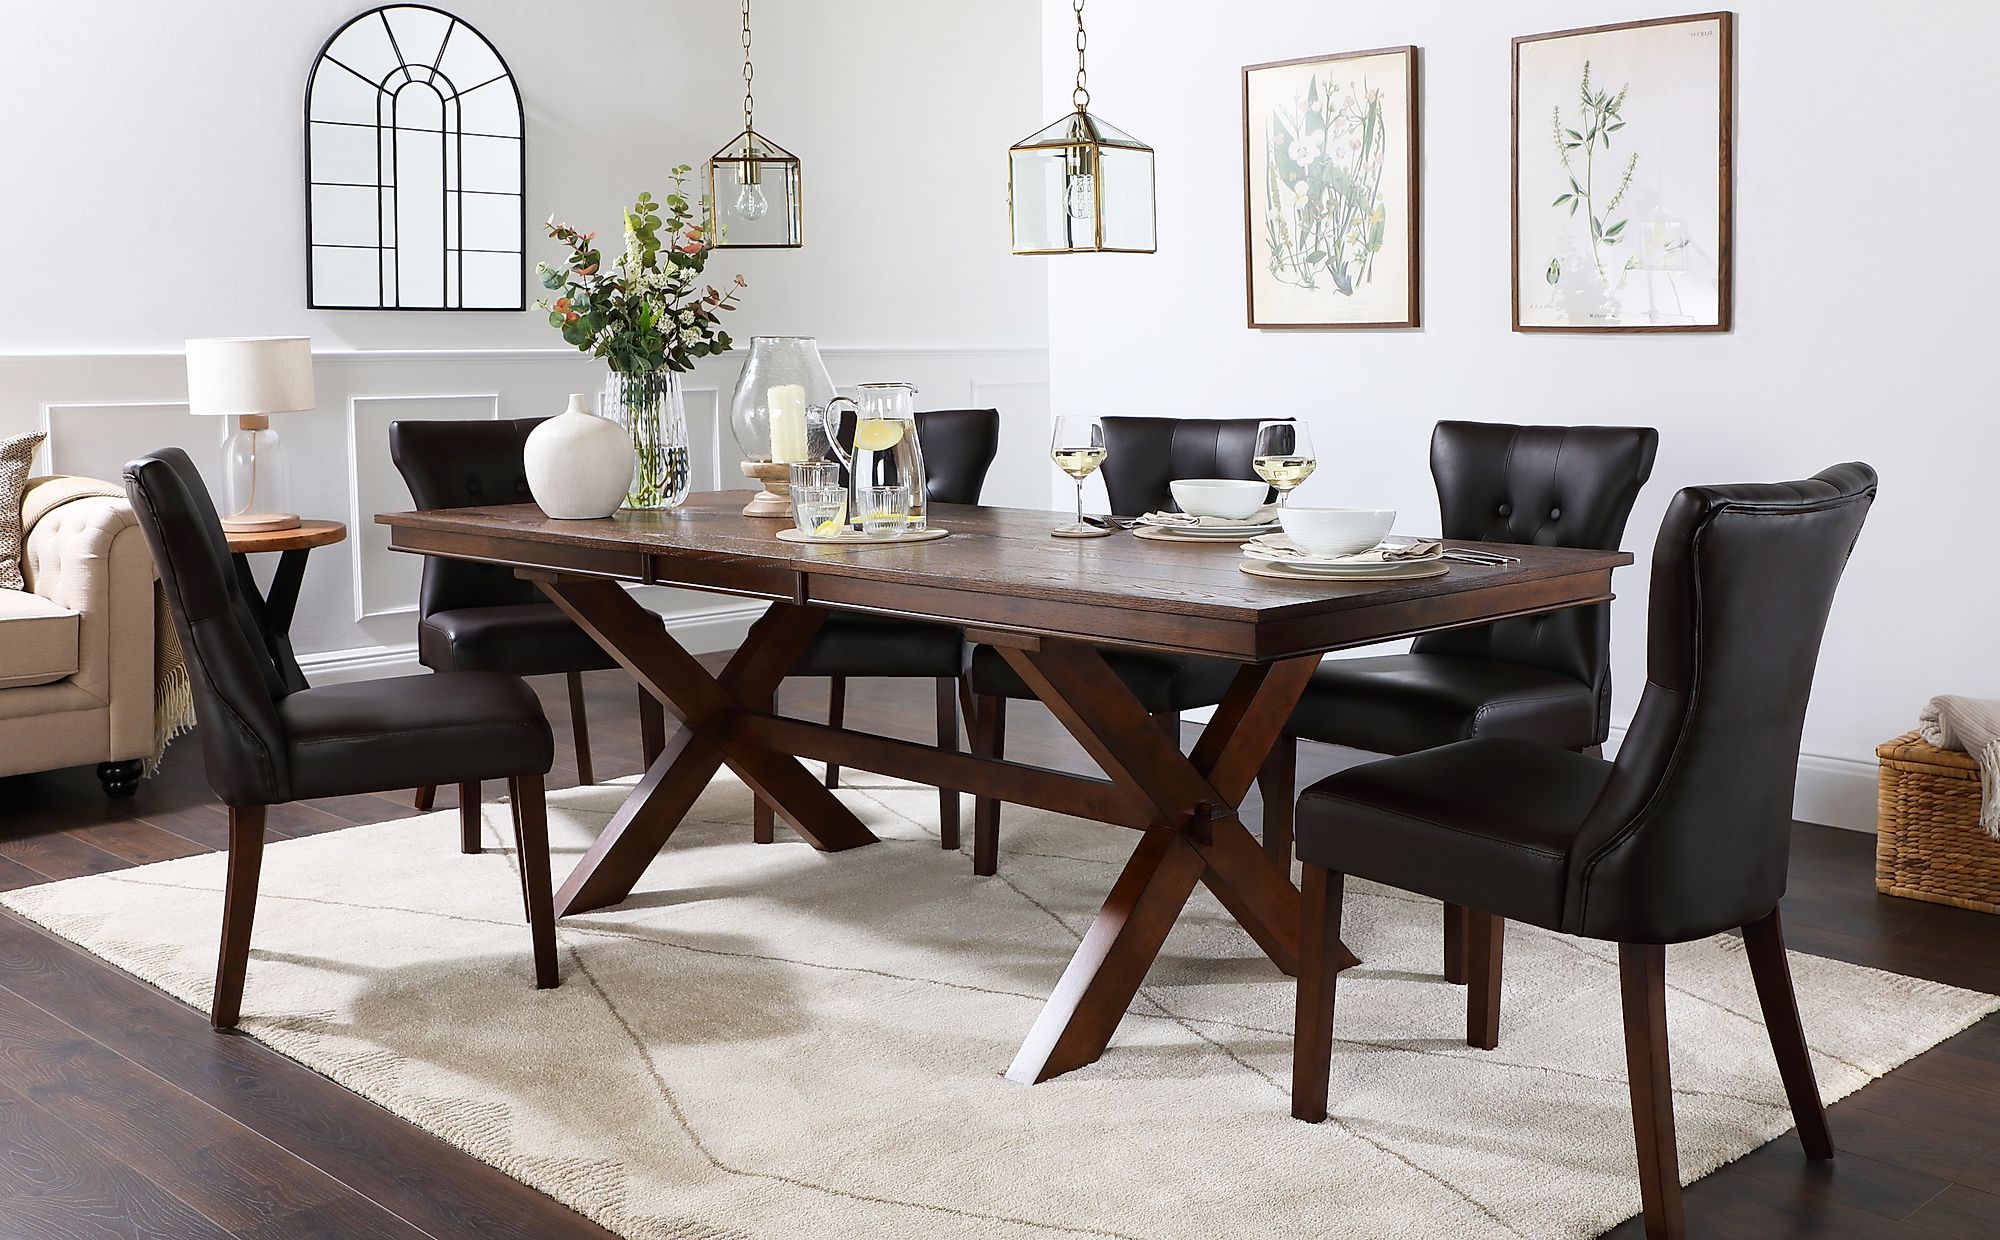 Extending Dining Room Tables For Sale